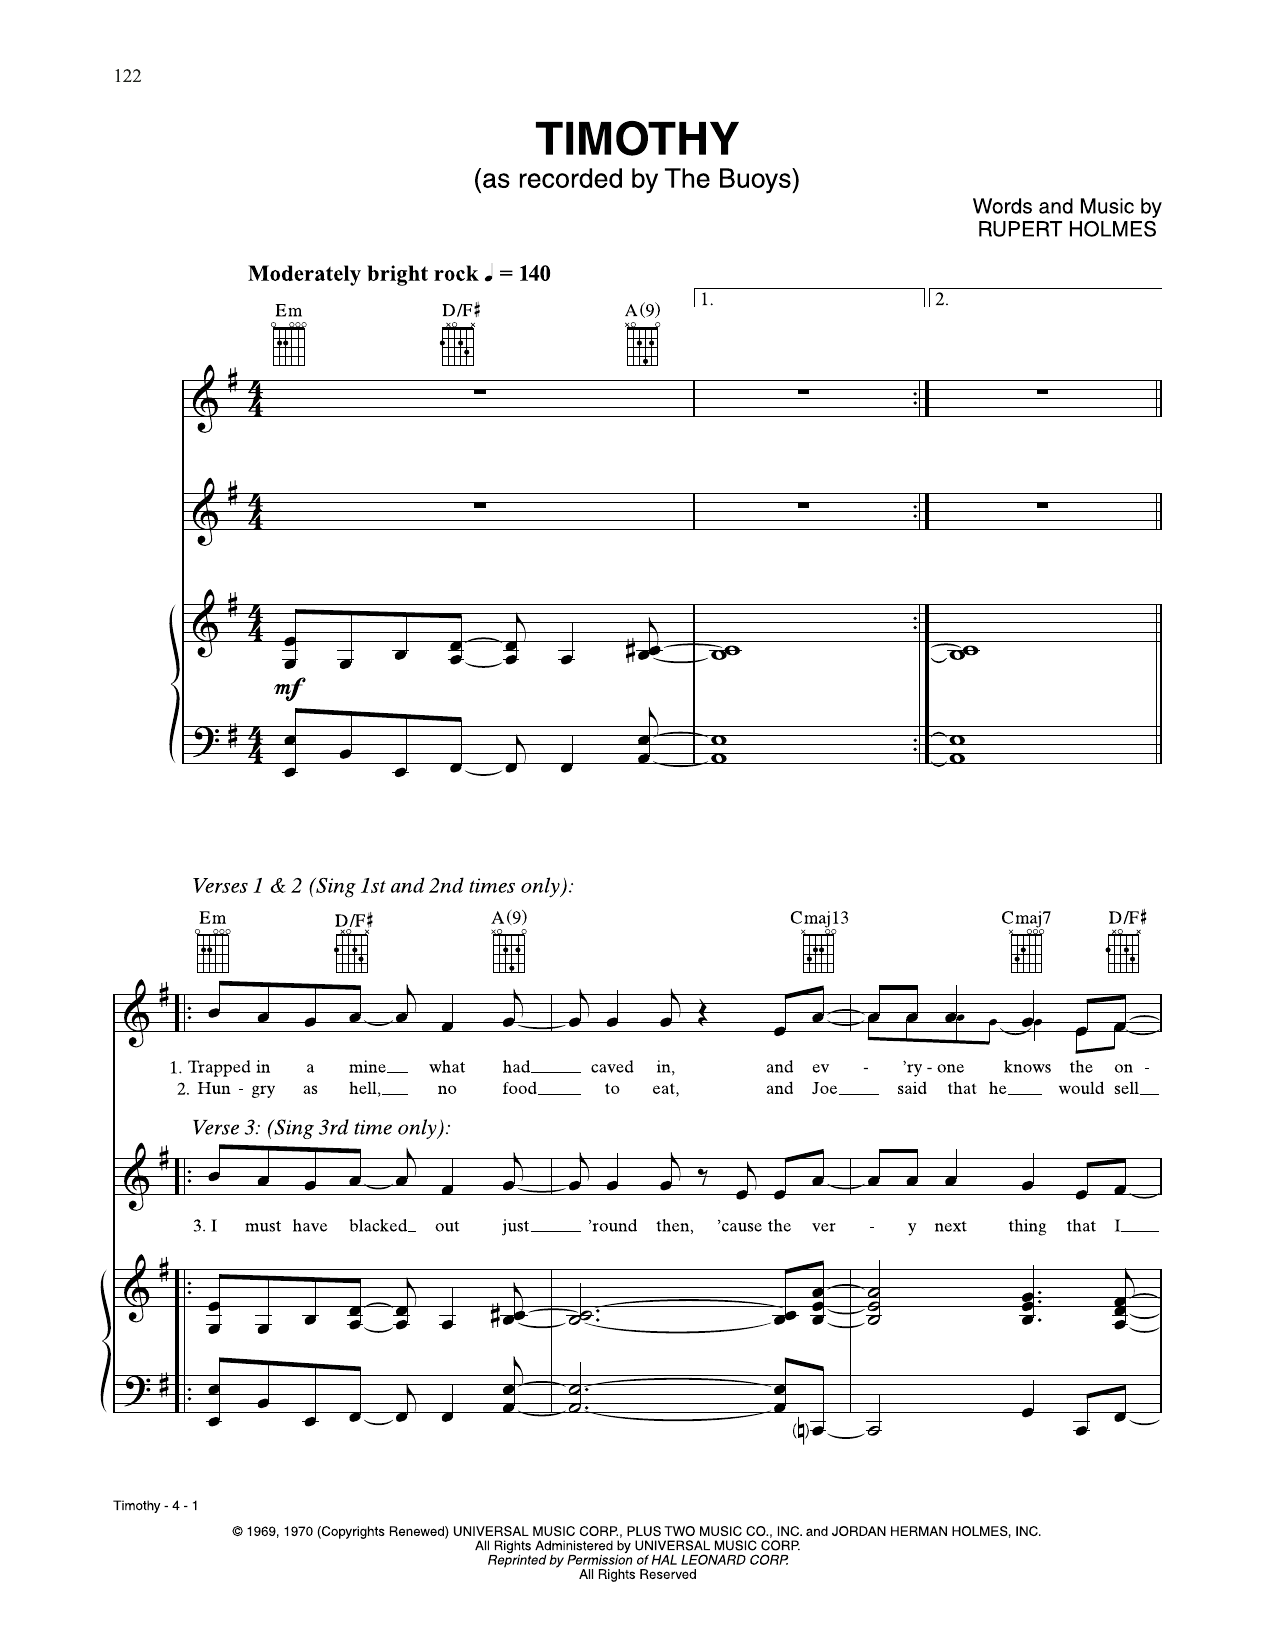 Download The Buoys Timothy Sheet Music